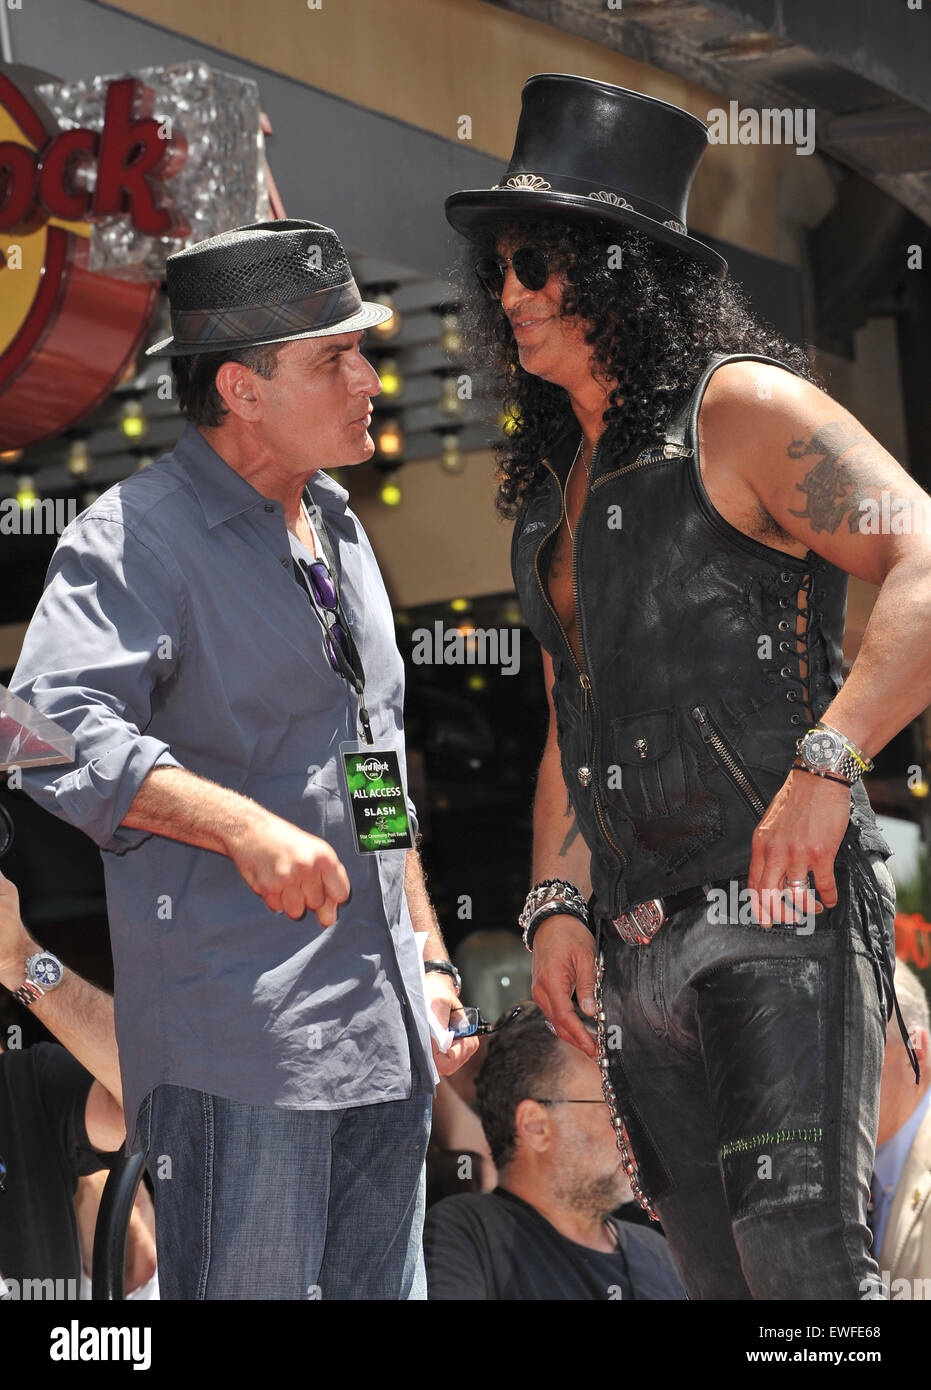 LOS ANGELES, CA - JULY 10, 2012: Rock guitarist Slash & actor Charlie Sheen on Hollywood Blvd where he was honored with a star on the Hollywood Walk of Fame. Stock Photo